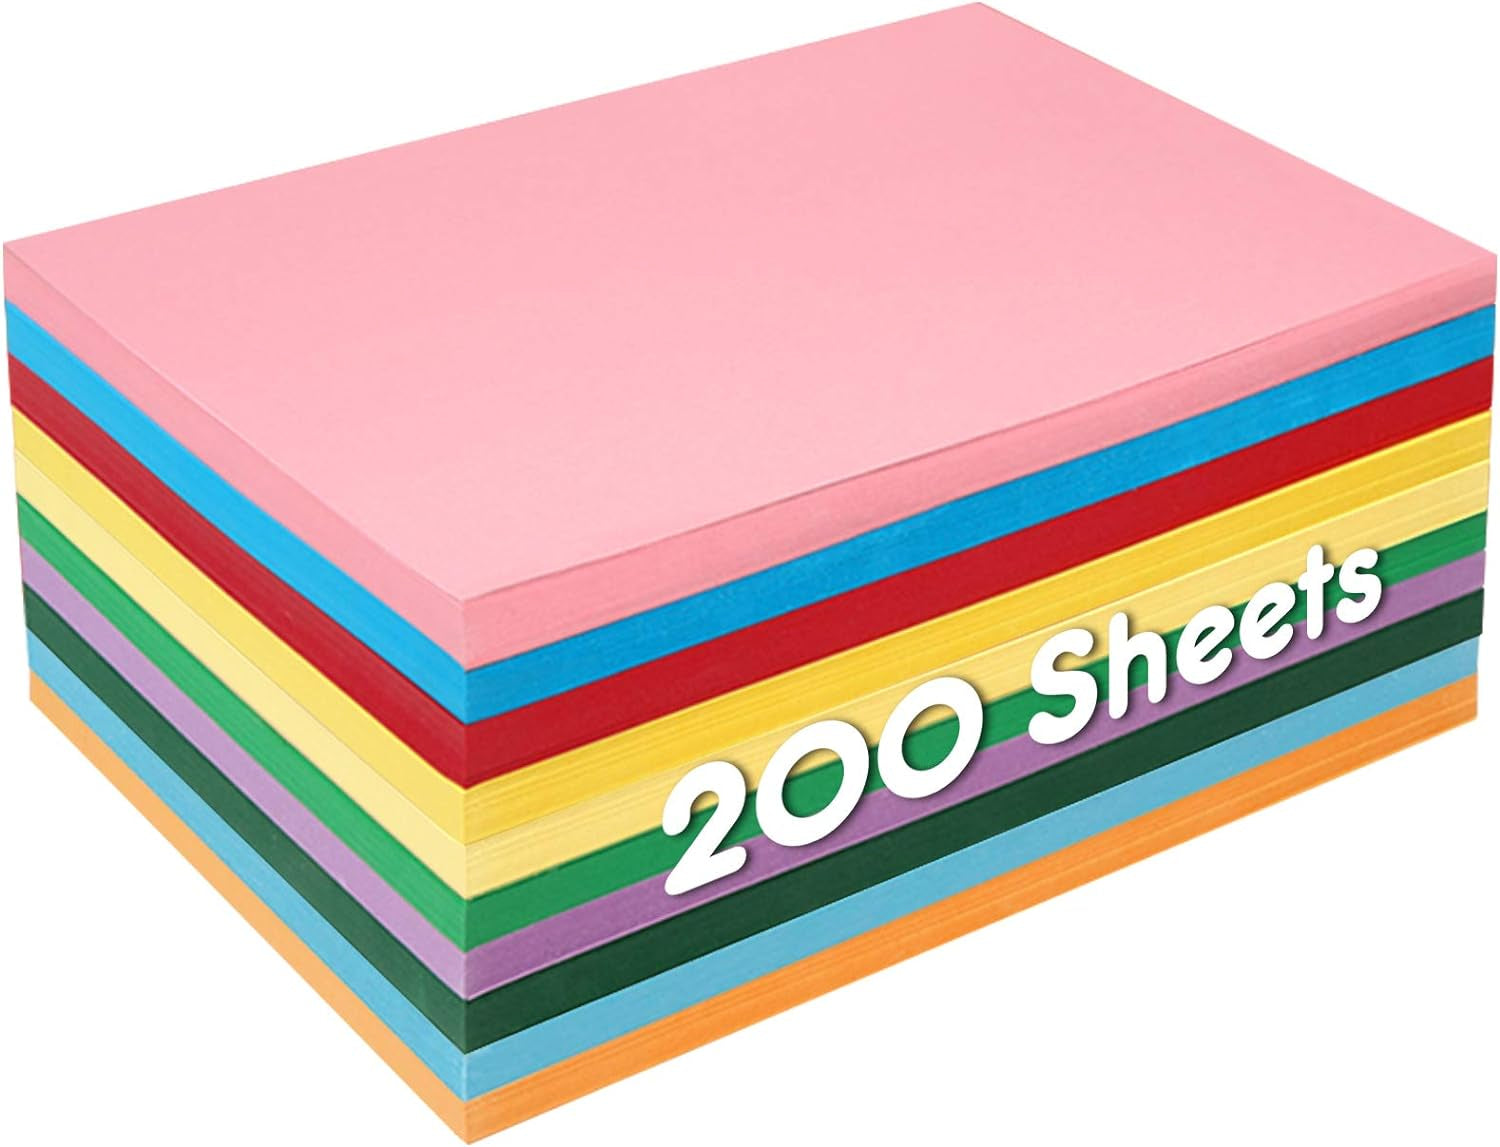 Construction Paper Pack, 200Sheets Heavy Duty Construction Paper Color Copy Paper for Crafts & Art, A4, 10 Assorted Colors, School Supplies